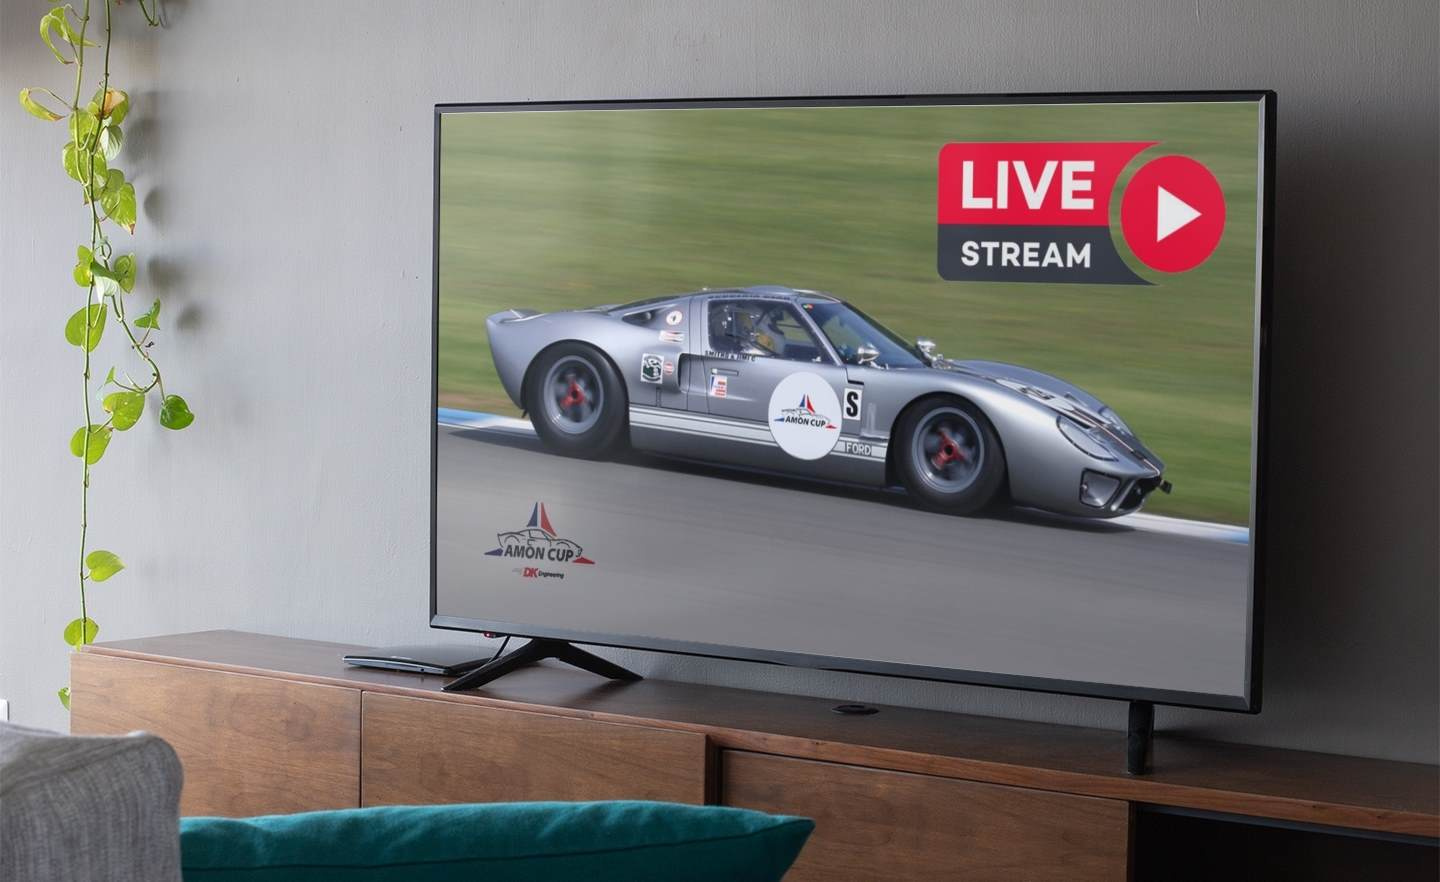 Live streaming the Motor Racing Legends Silverstone GP Meeting - Latest News and Events - News and Press